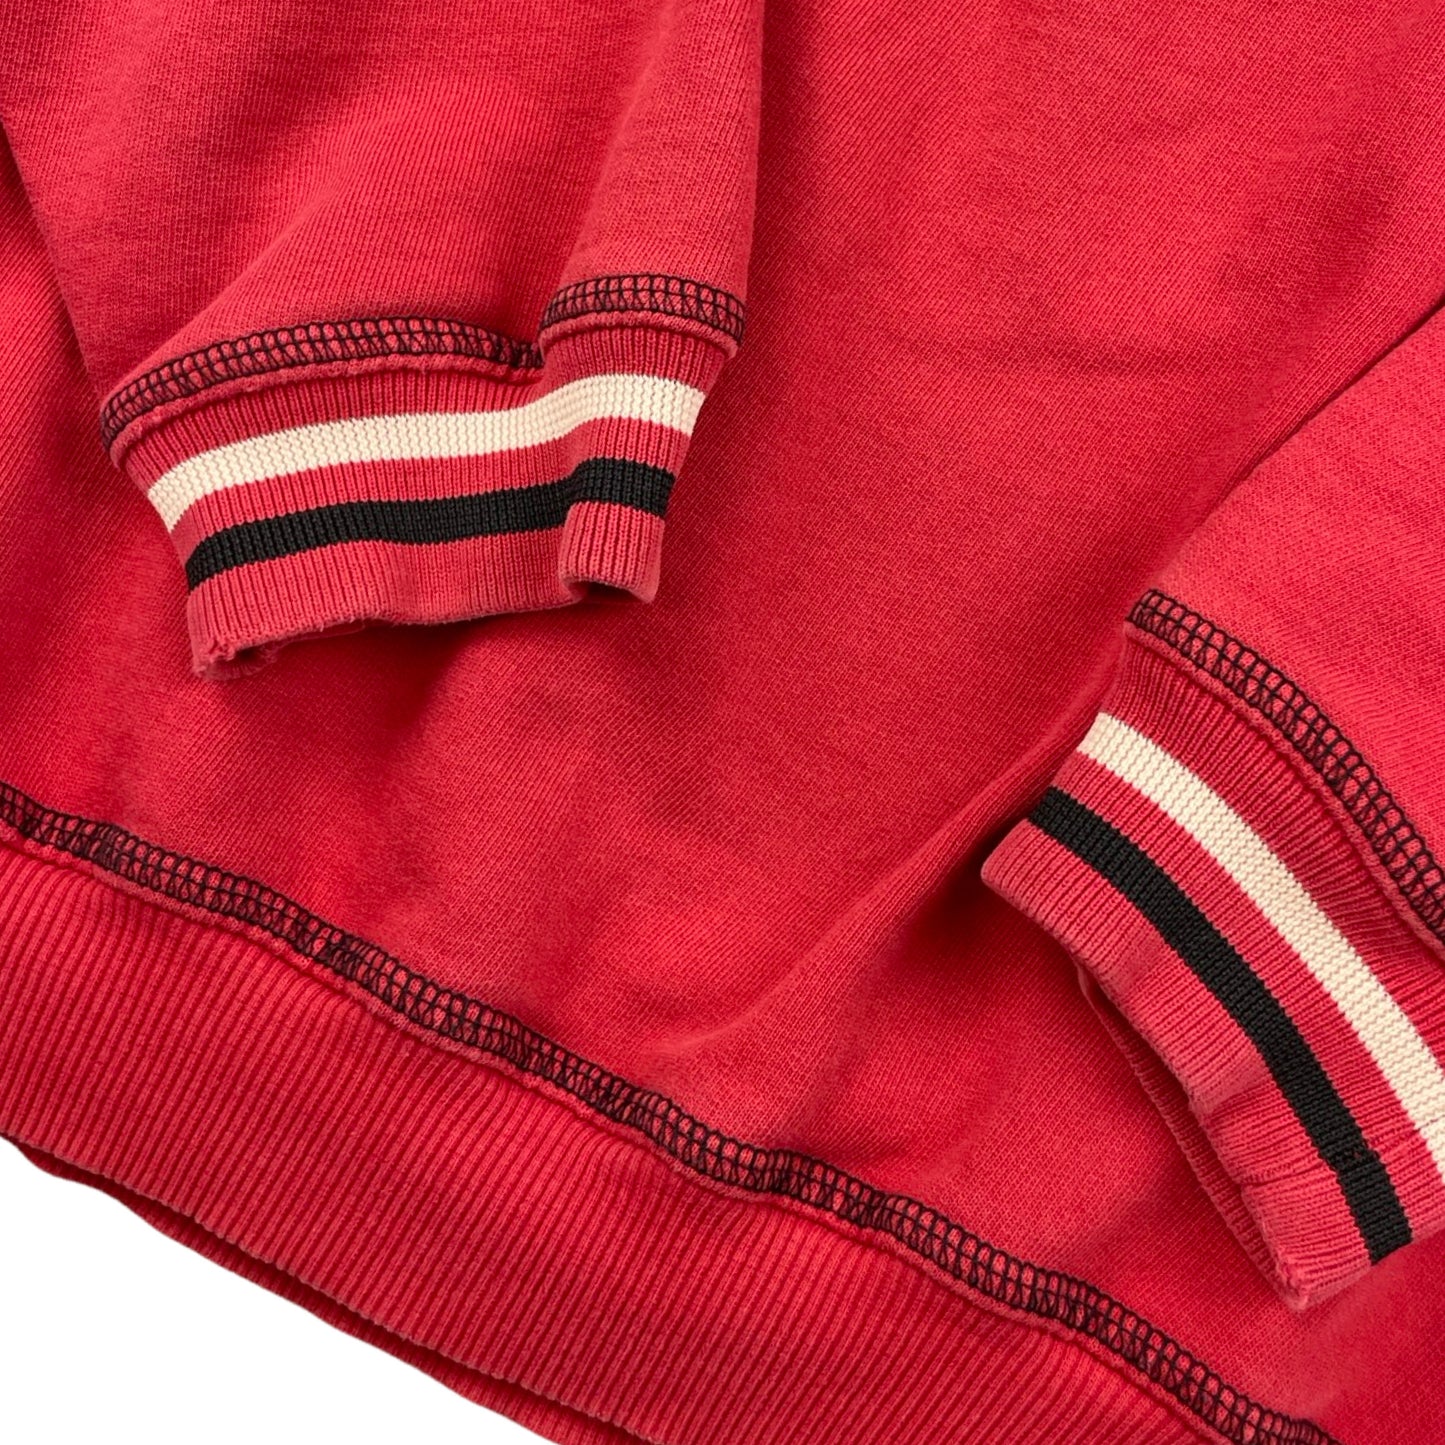 Vintage Fila Red Spell-out Sweatshirt XL